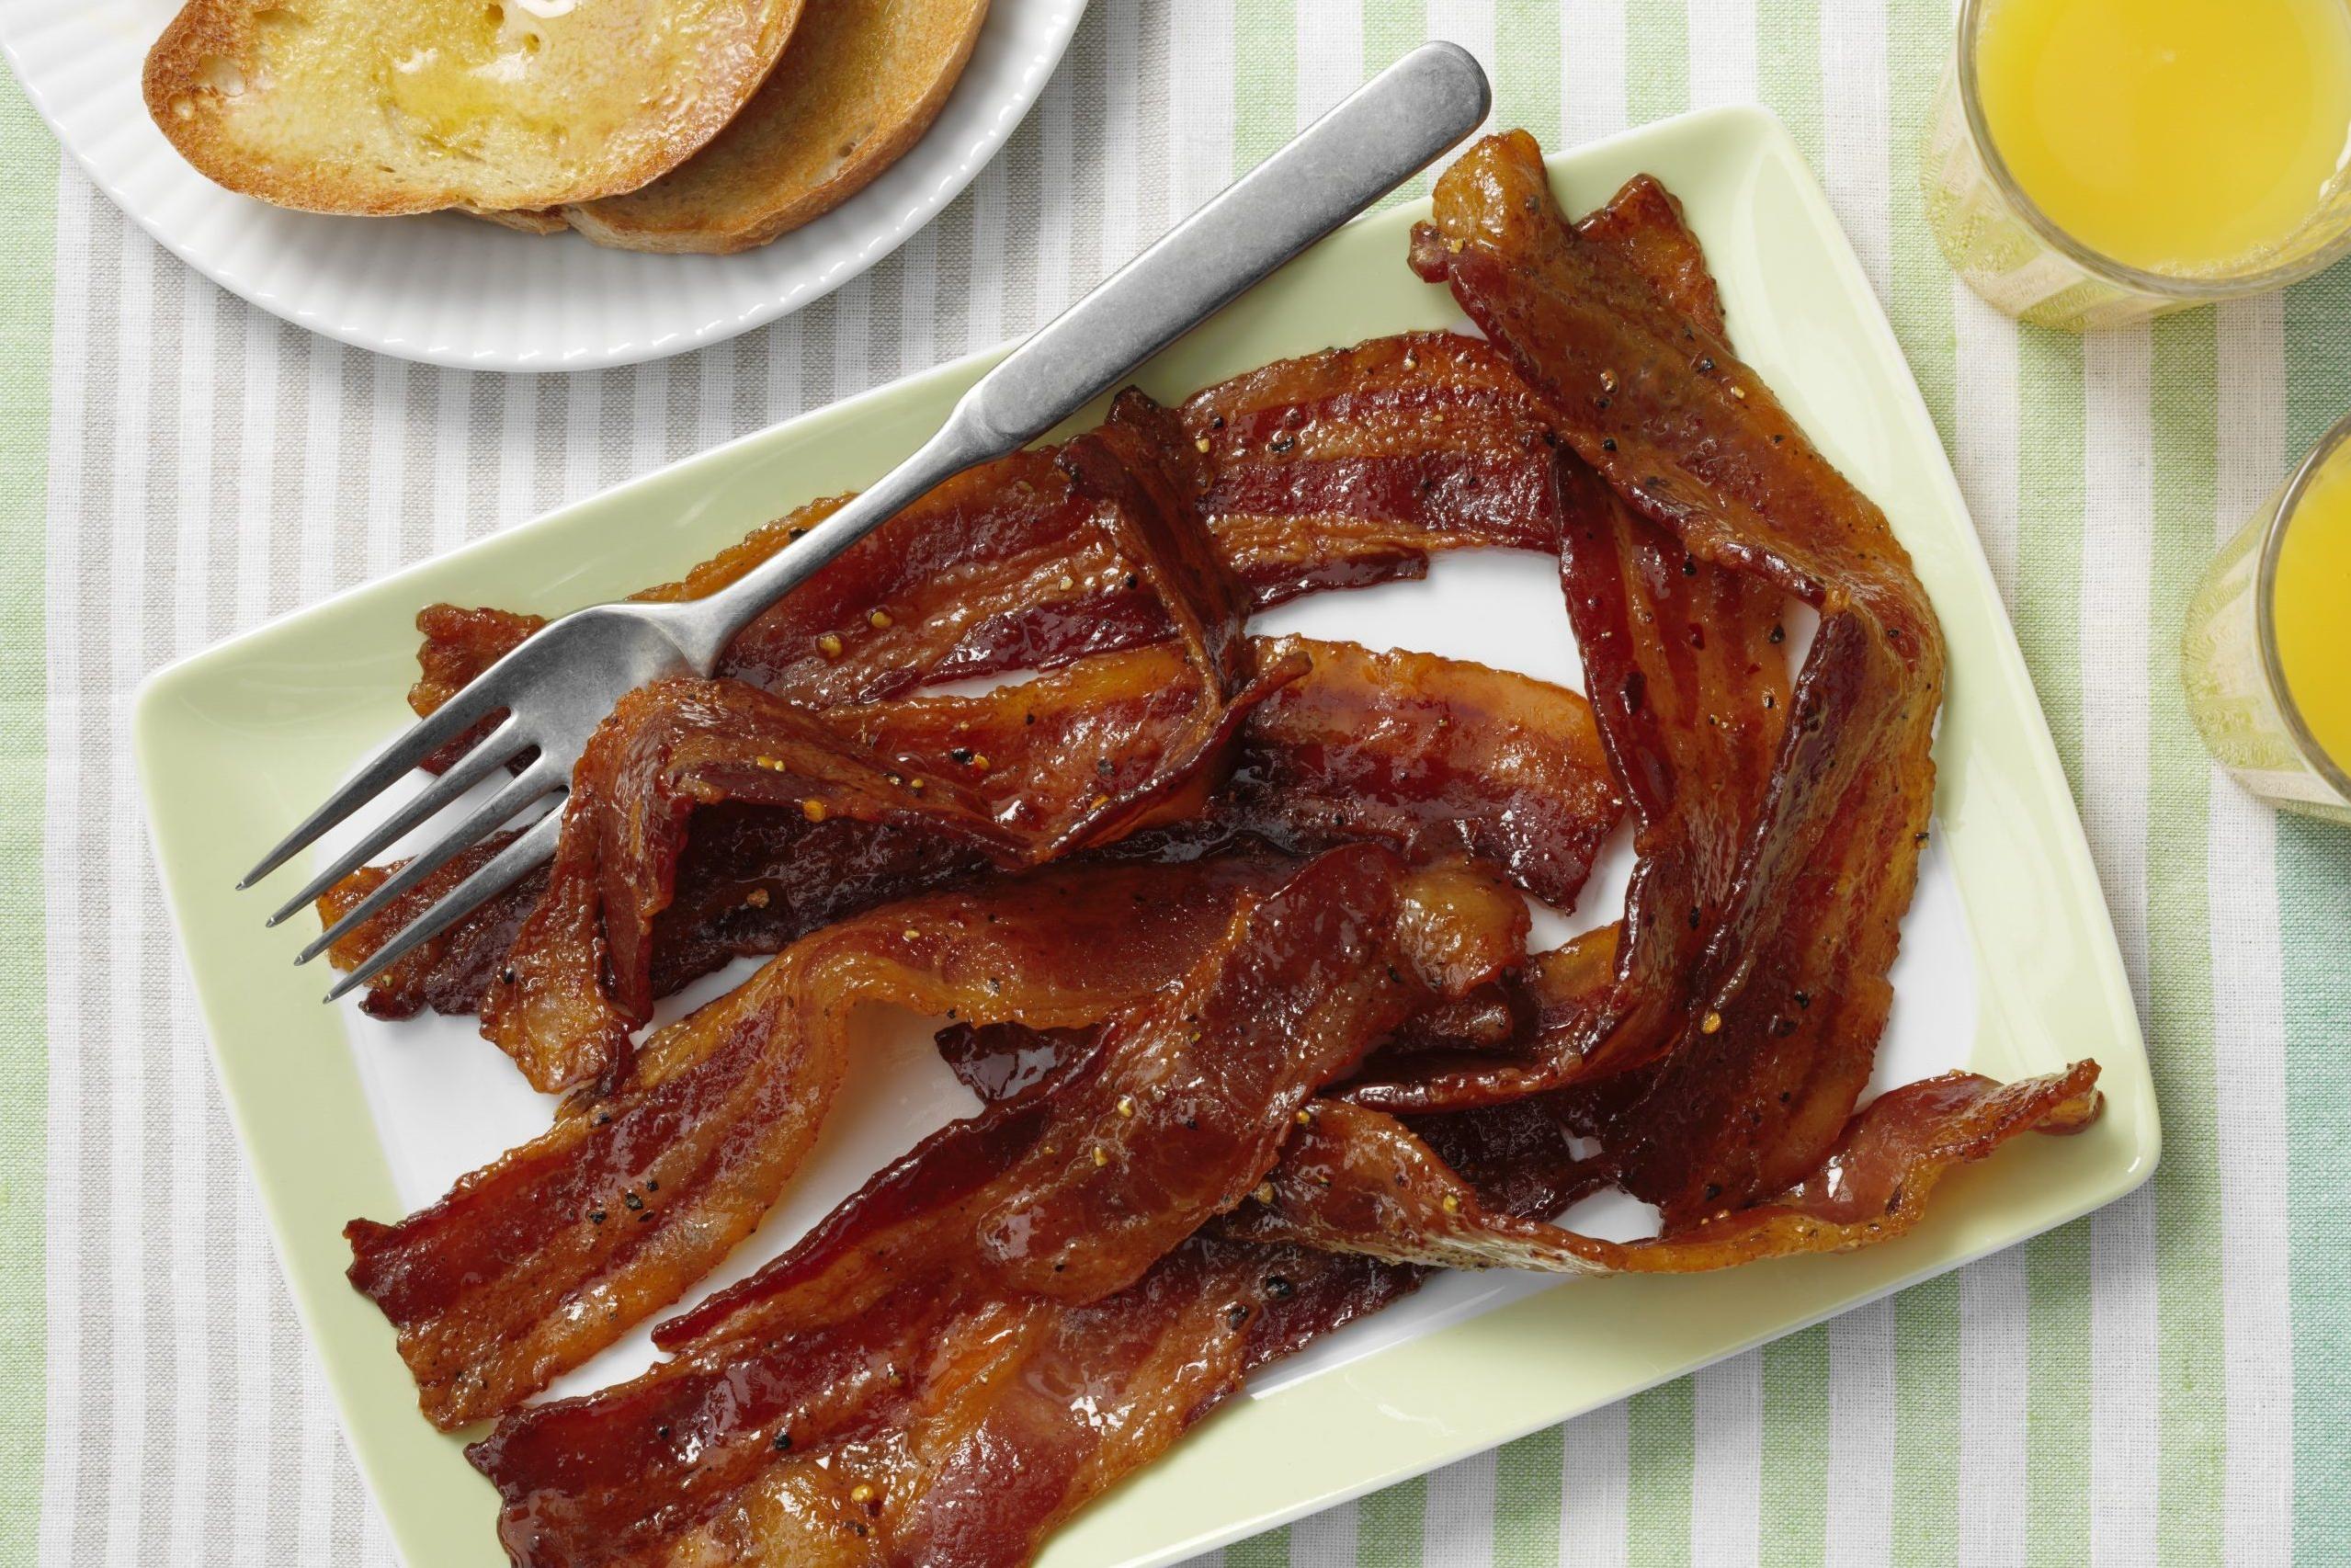  A breakfast delight that's not for the faint of heart – introducing coffee and brown sugar glazed bacon.